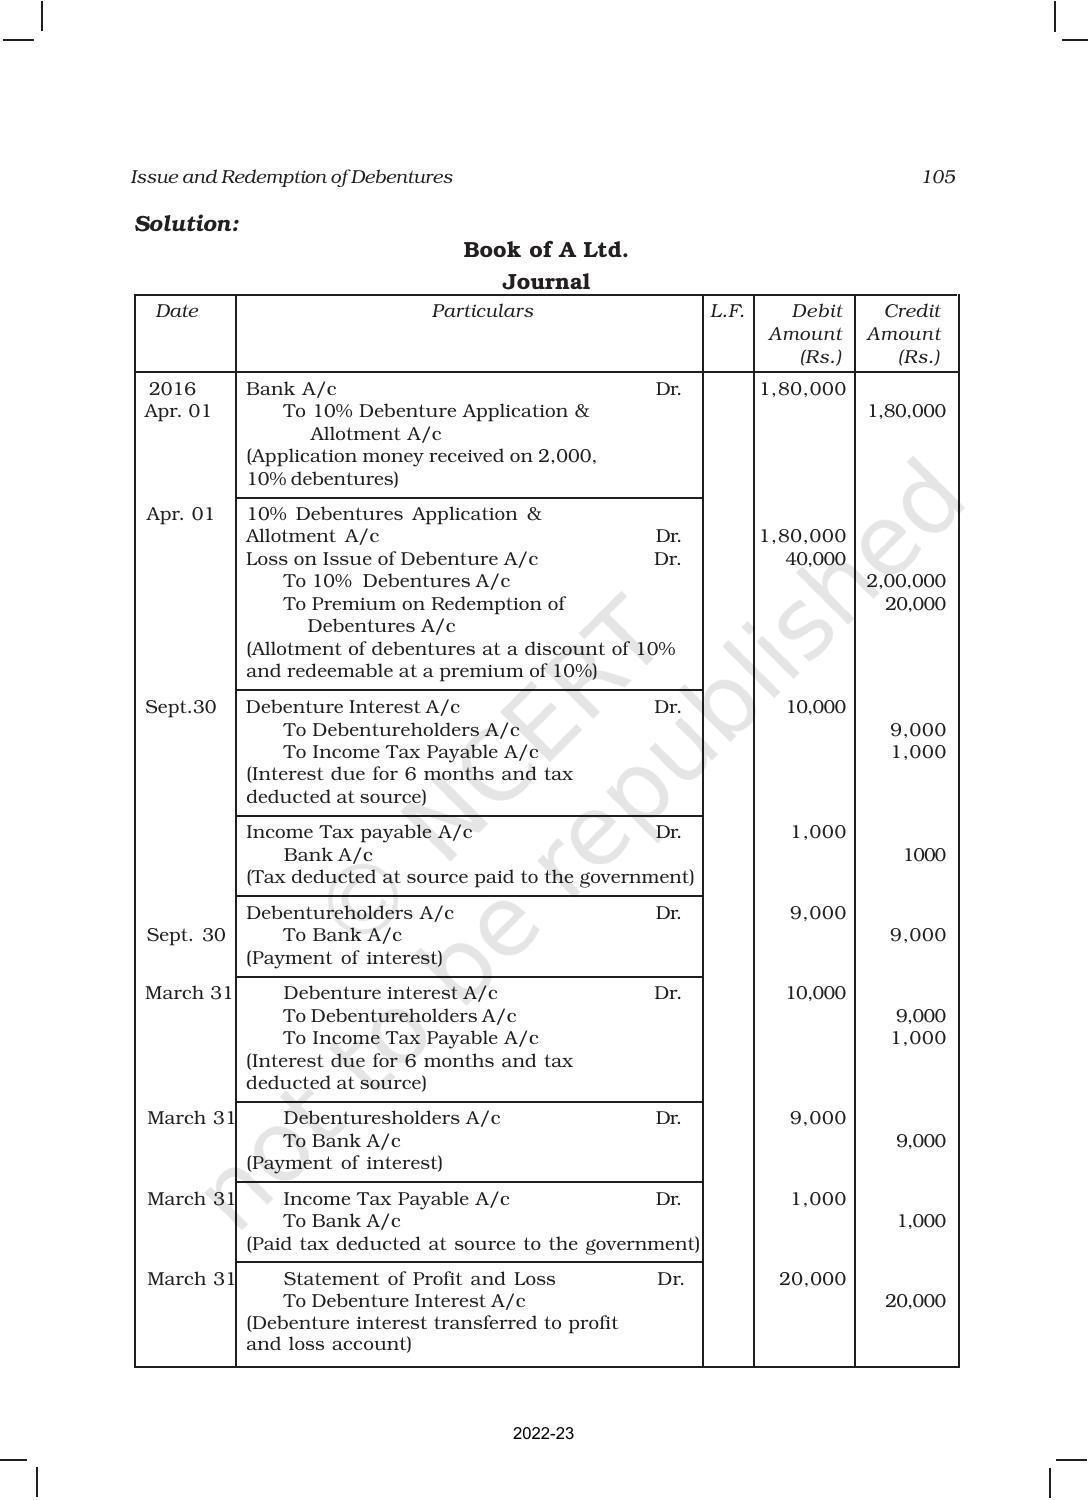 NCERT Book for Class 12 Accountancy Part II Chapter 1 Issue and Redemption of Debentures - Page 31